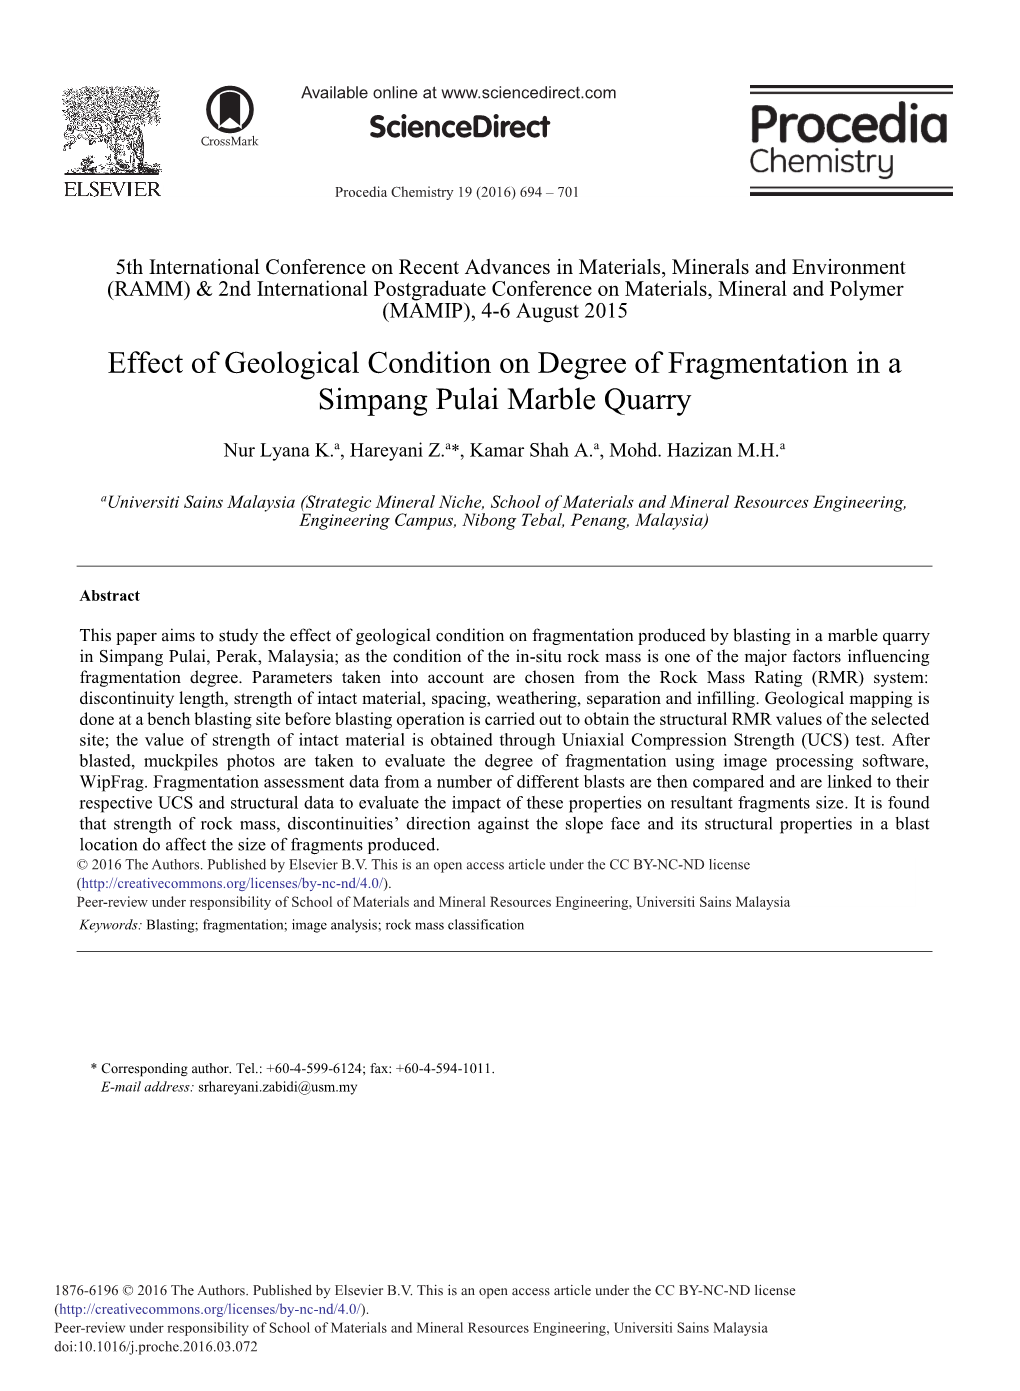 Effect of Geological Condition on Degree of Fragmentation in a Simpang Pulai Marble Quarry